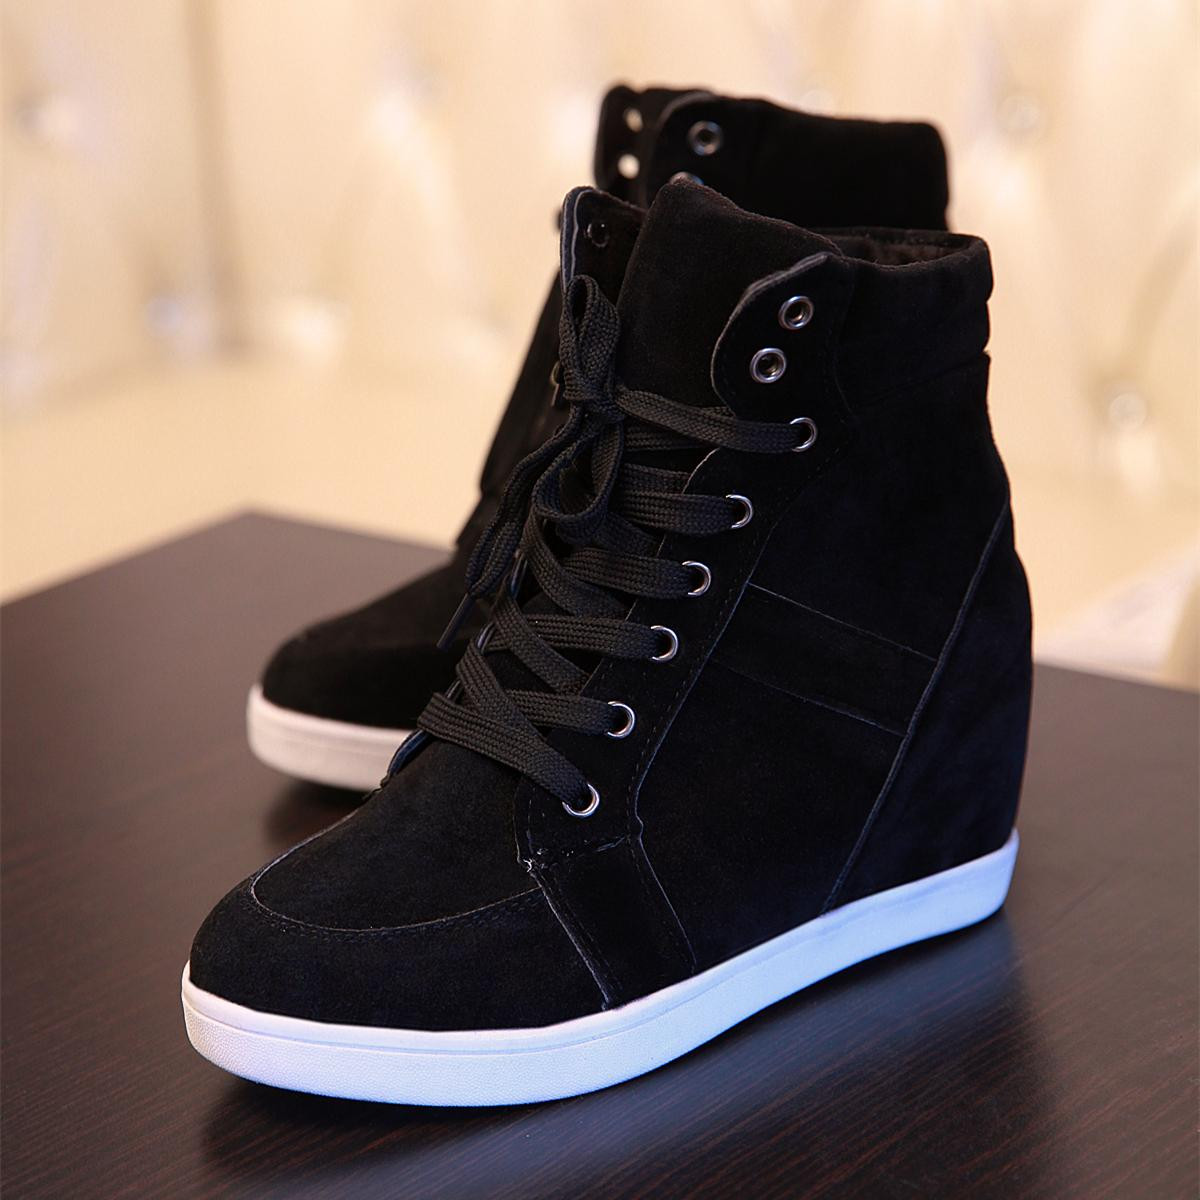 Anklet With Sneakers
 Hot Sale Brand New Fashion Women S High Top Lace Up